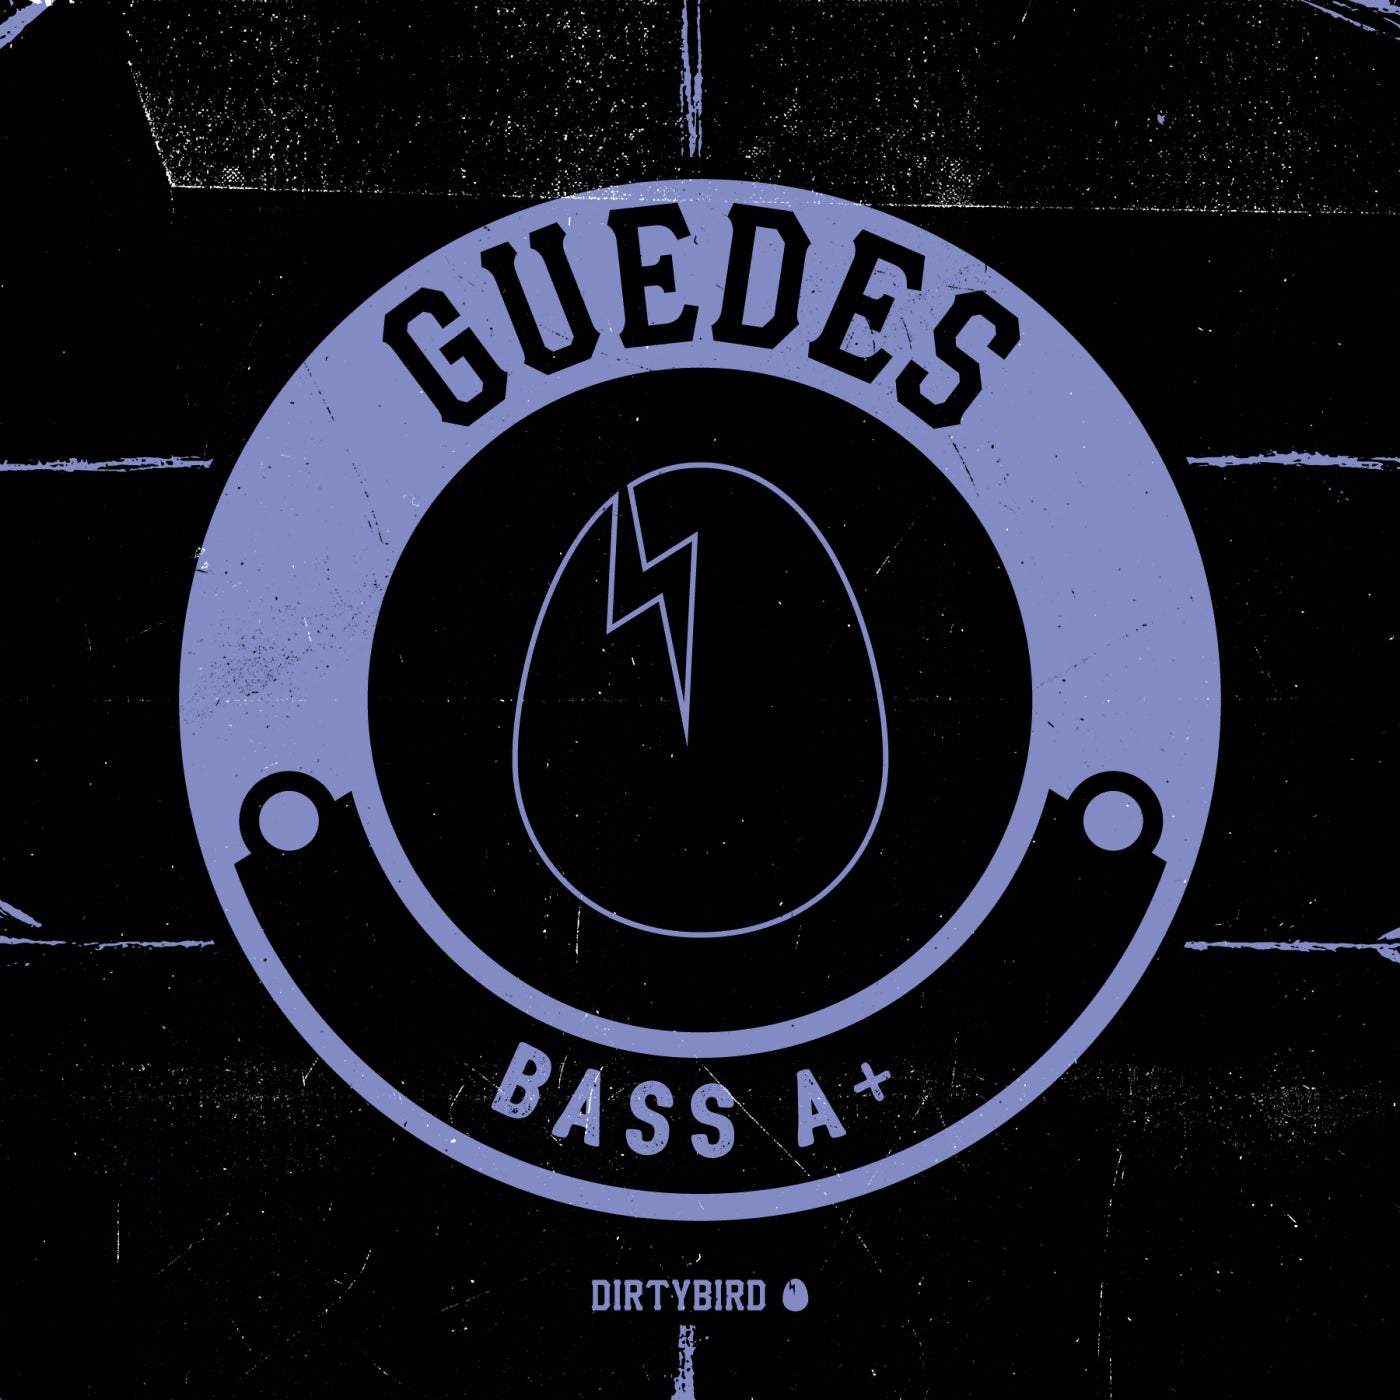 Download Guedes - Bass A+ on Electrobuzz